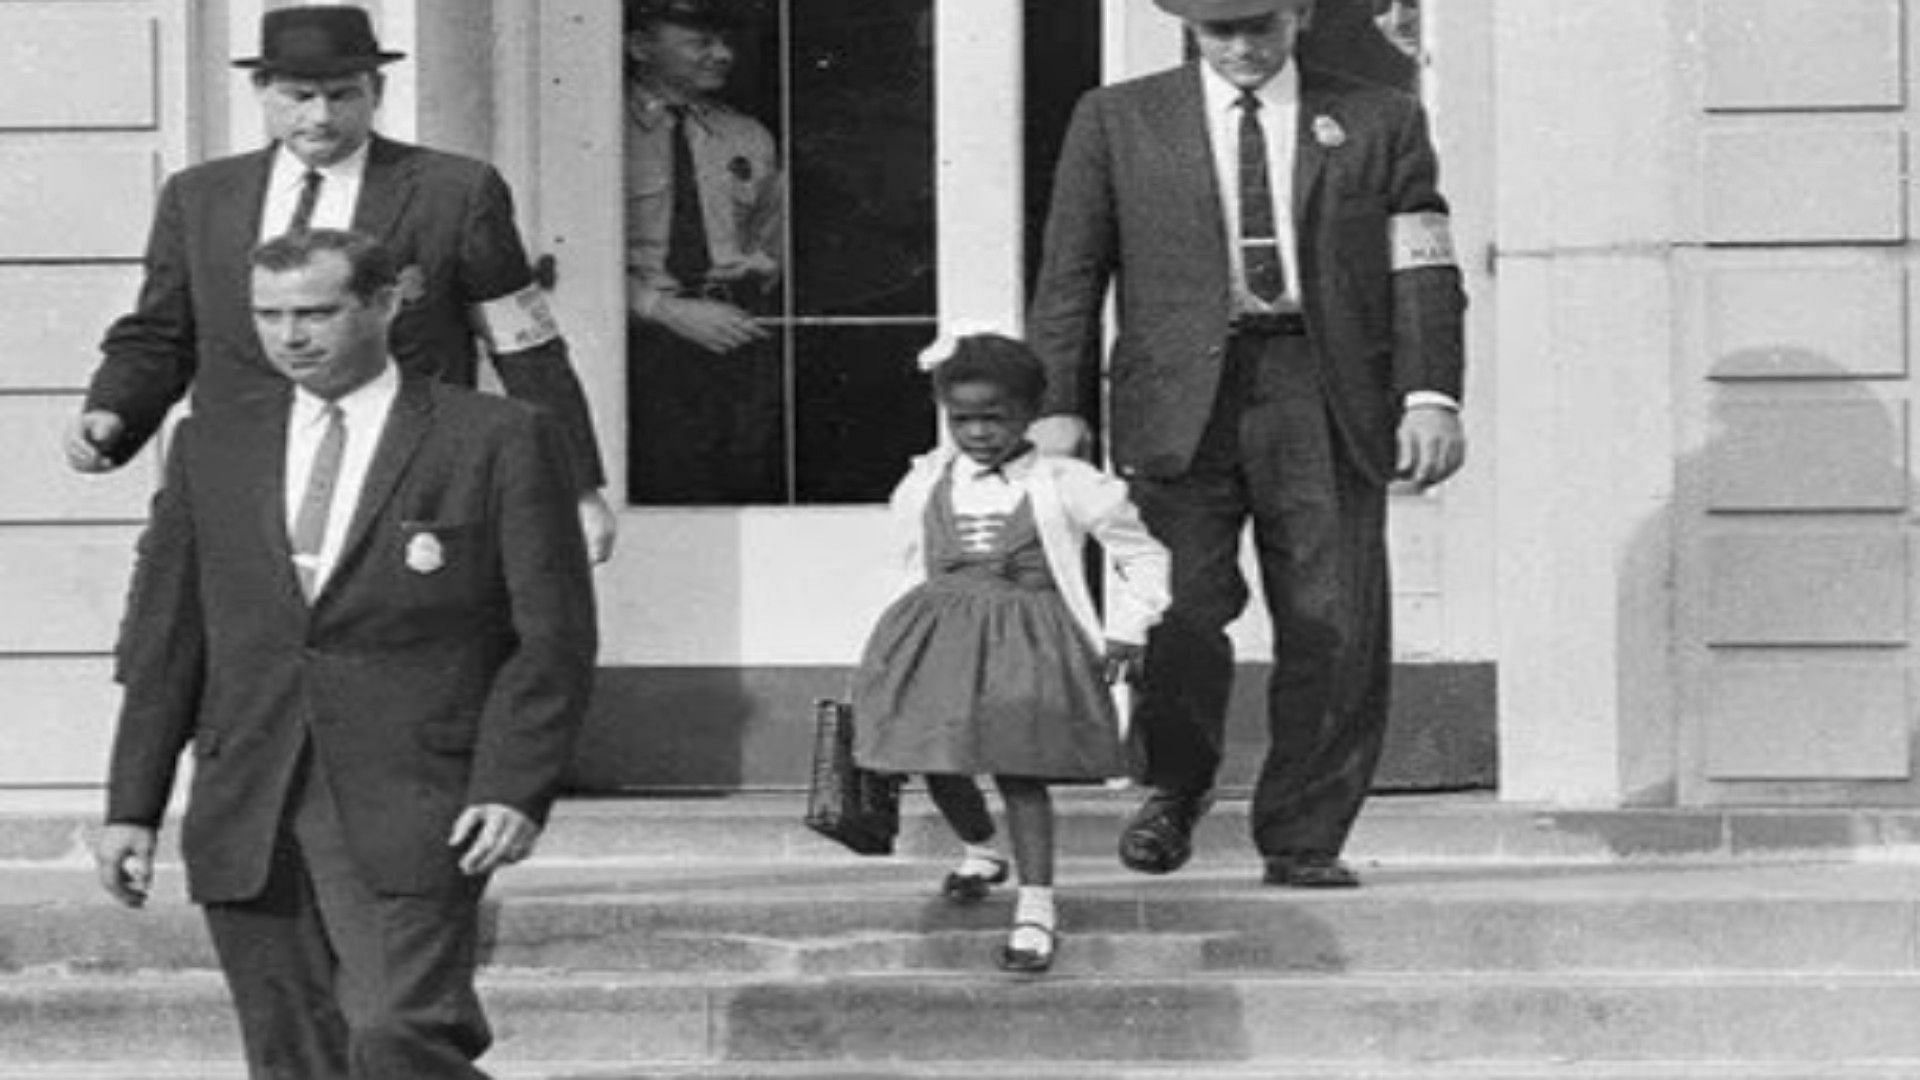 Ruby Bridges (6) being escorted by federal marshalls to a all white shool in New Orleans in 1960 (Image via Nick Covington/twitter)